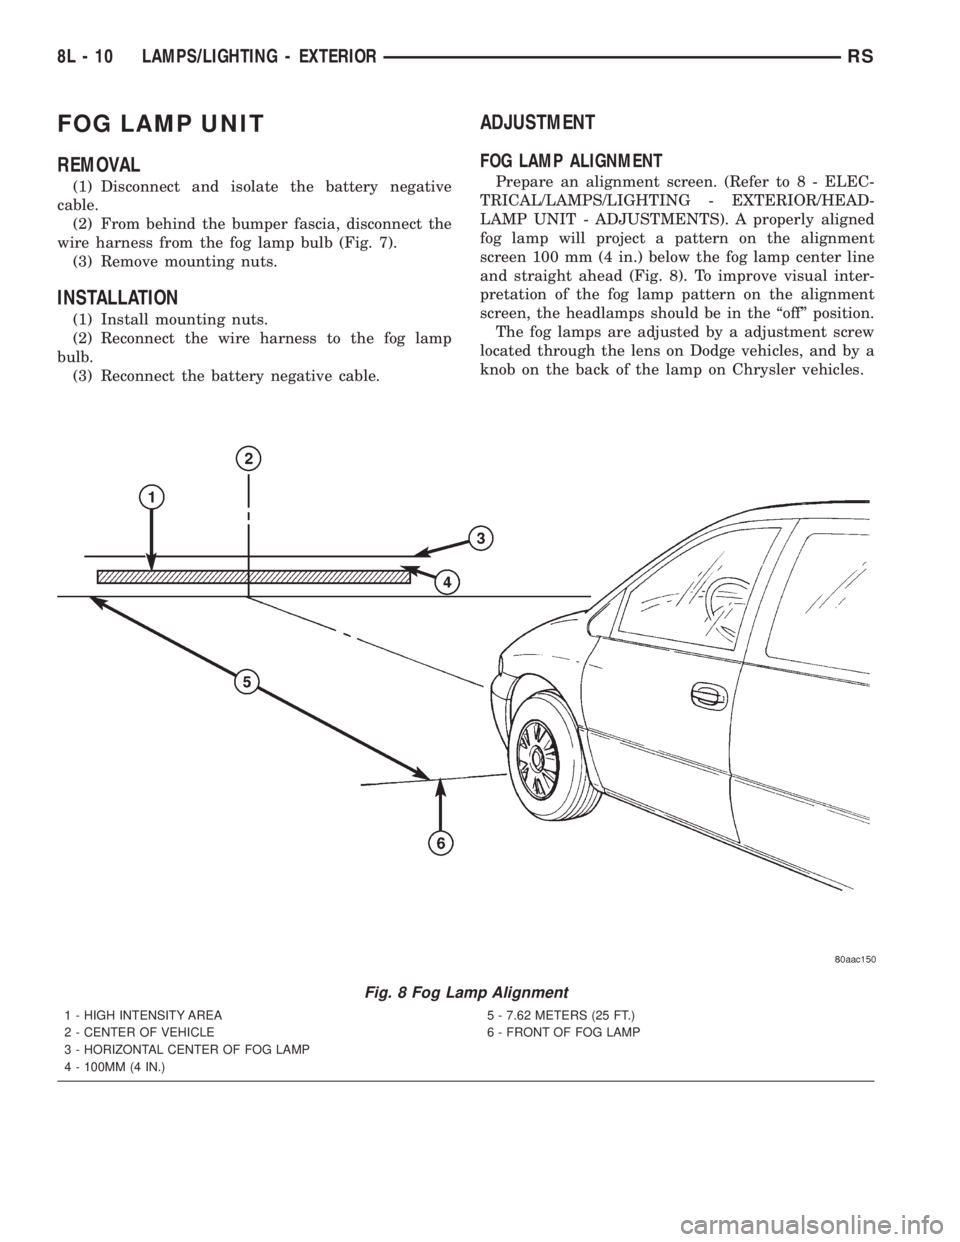 CHRYSLER VOYAGER 2001  Service Manual FOG LAMP UNIT
REMOVAL
(1) Disconnect and isolate the battery negative
cable.
(2) From behind the bumper fascia, disconnect the
wire harness from the fog lamp bulb (Fig. 7).
(3) Remove mounting nuts.
I